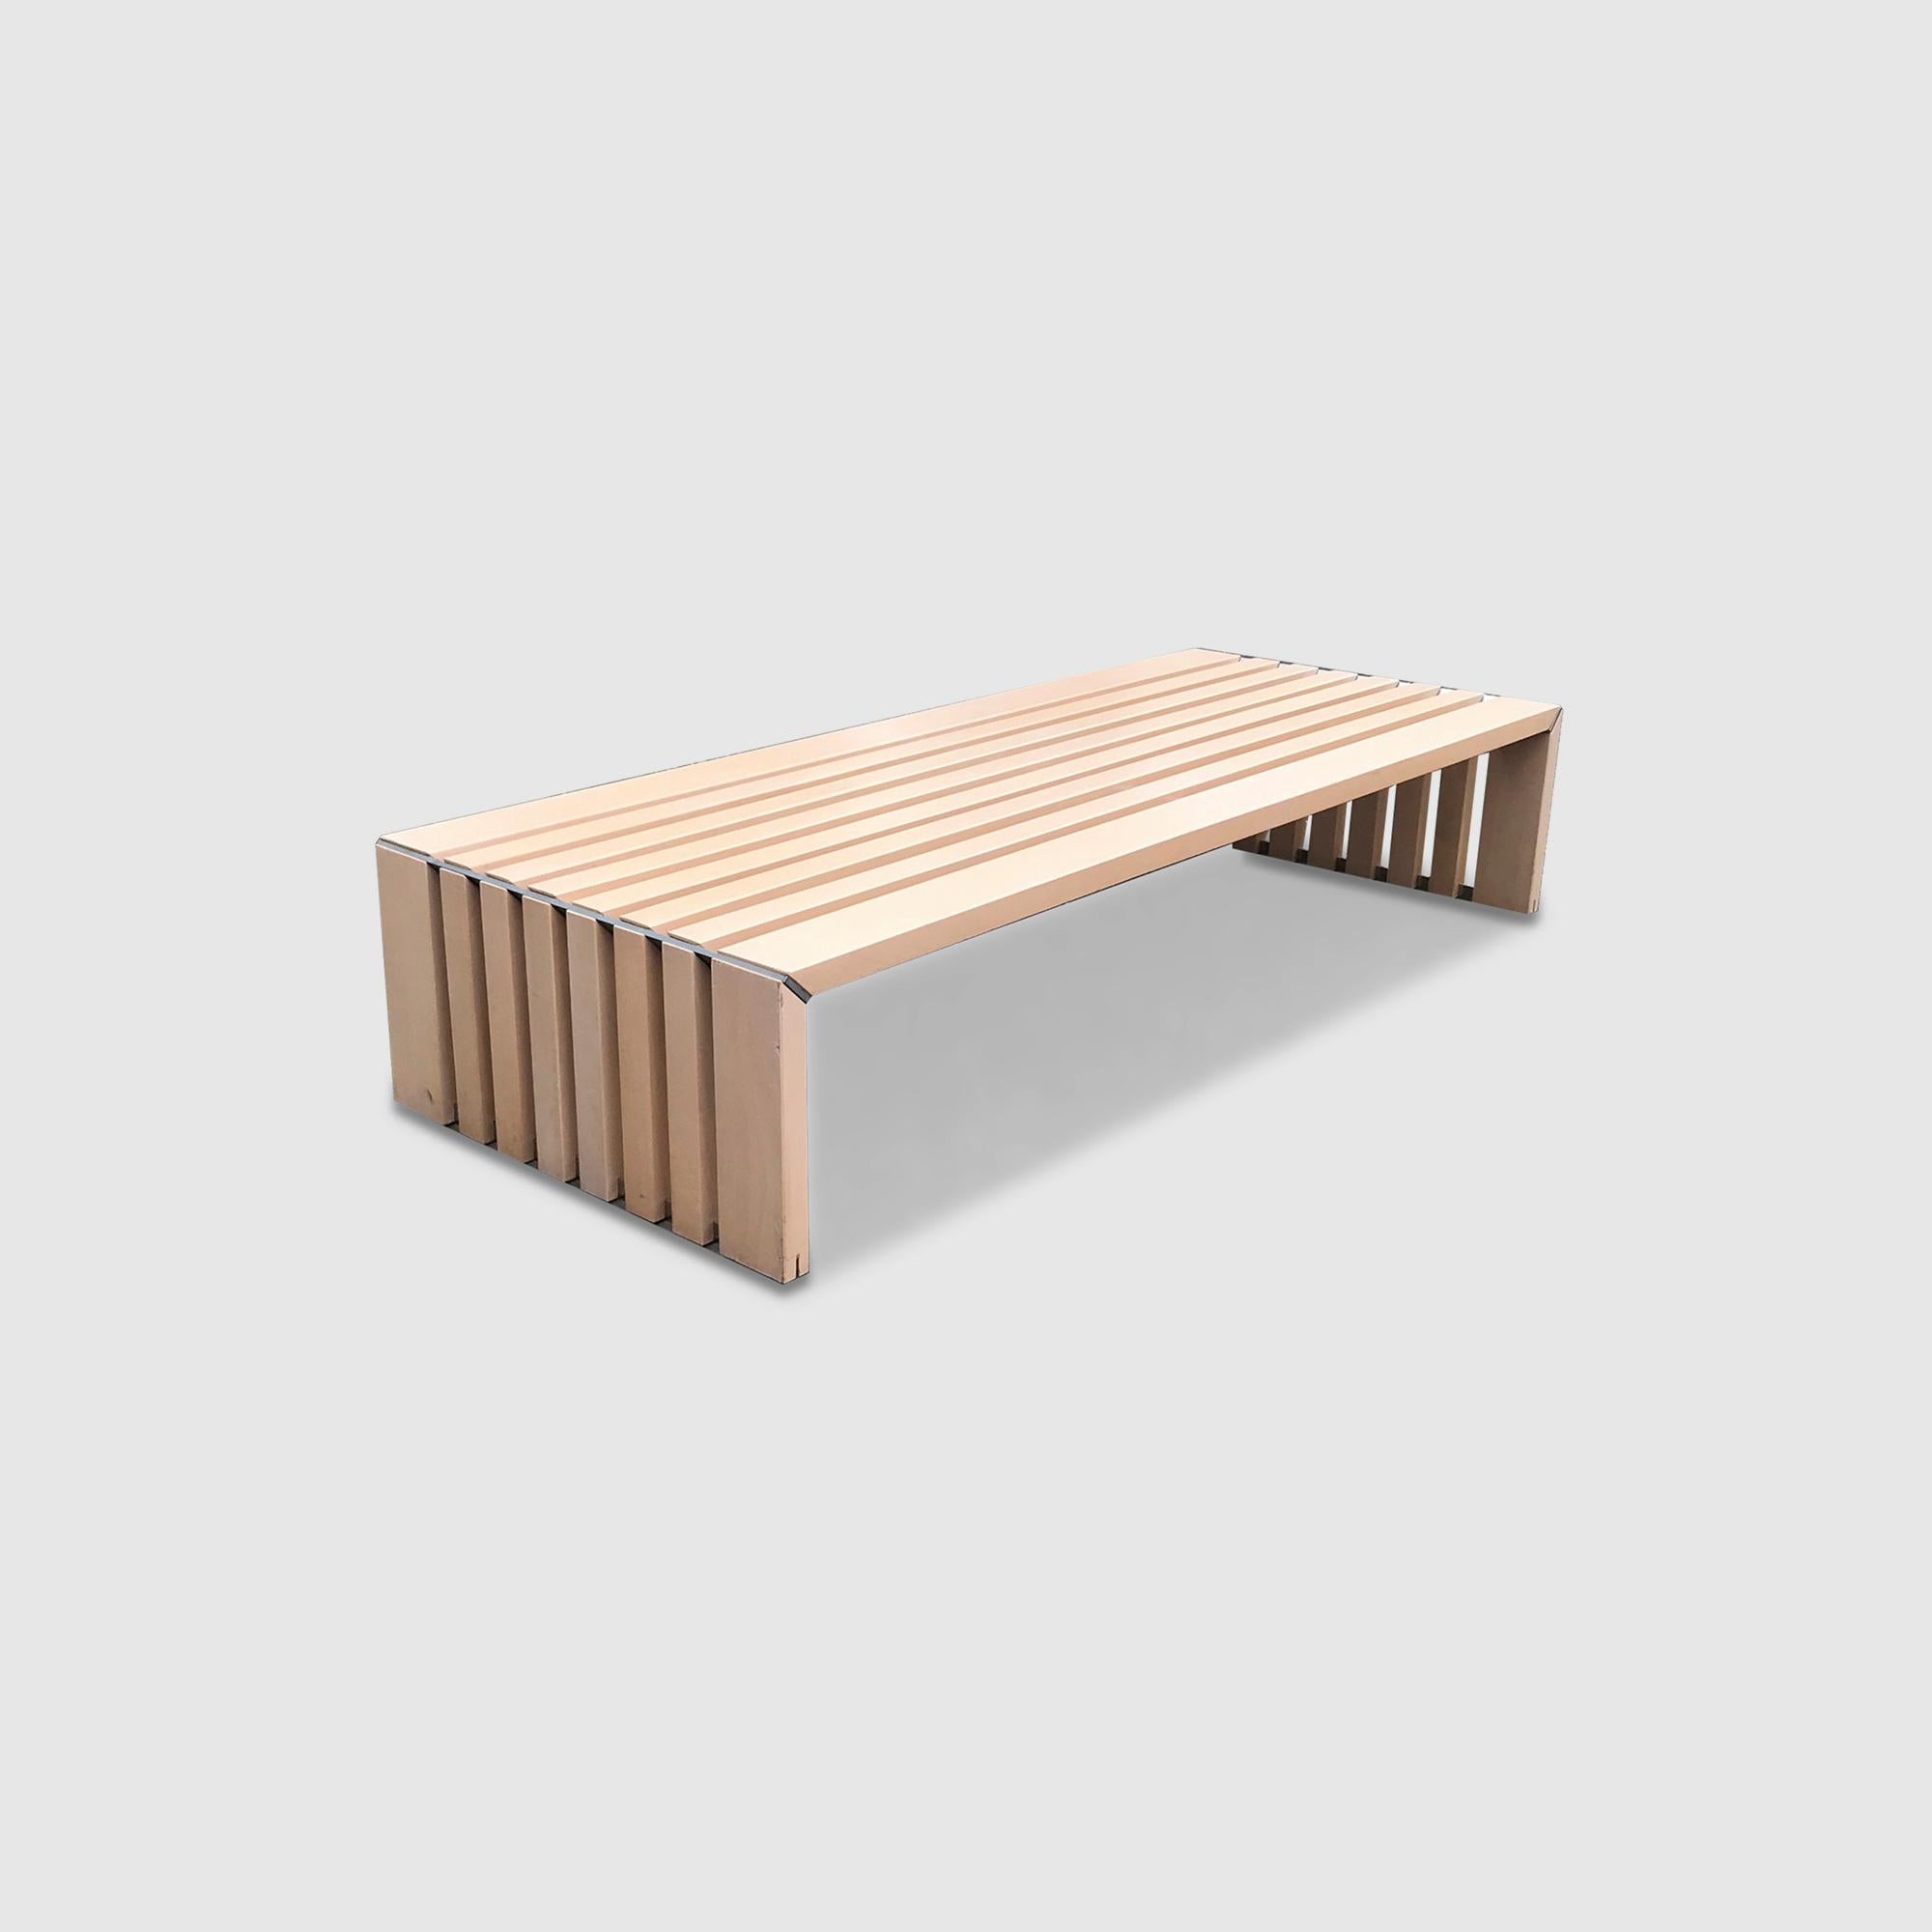 Passe Partout slatted ash bench by Walter Antonis for Arspect 1970s For Sale 1